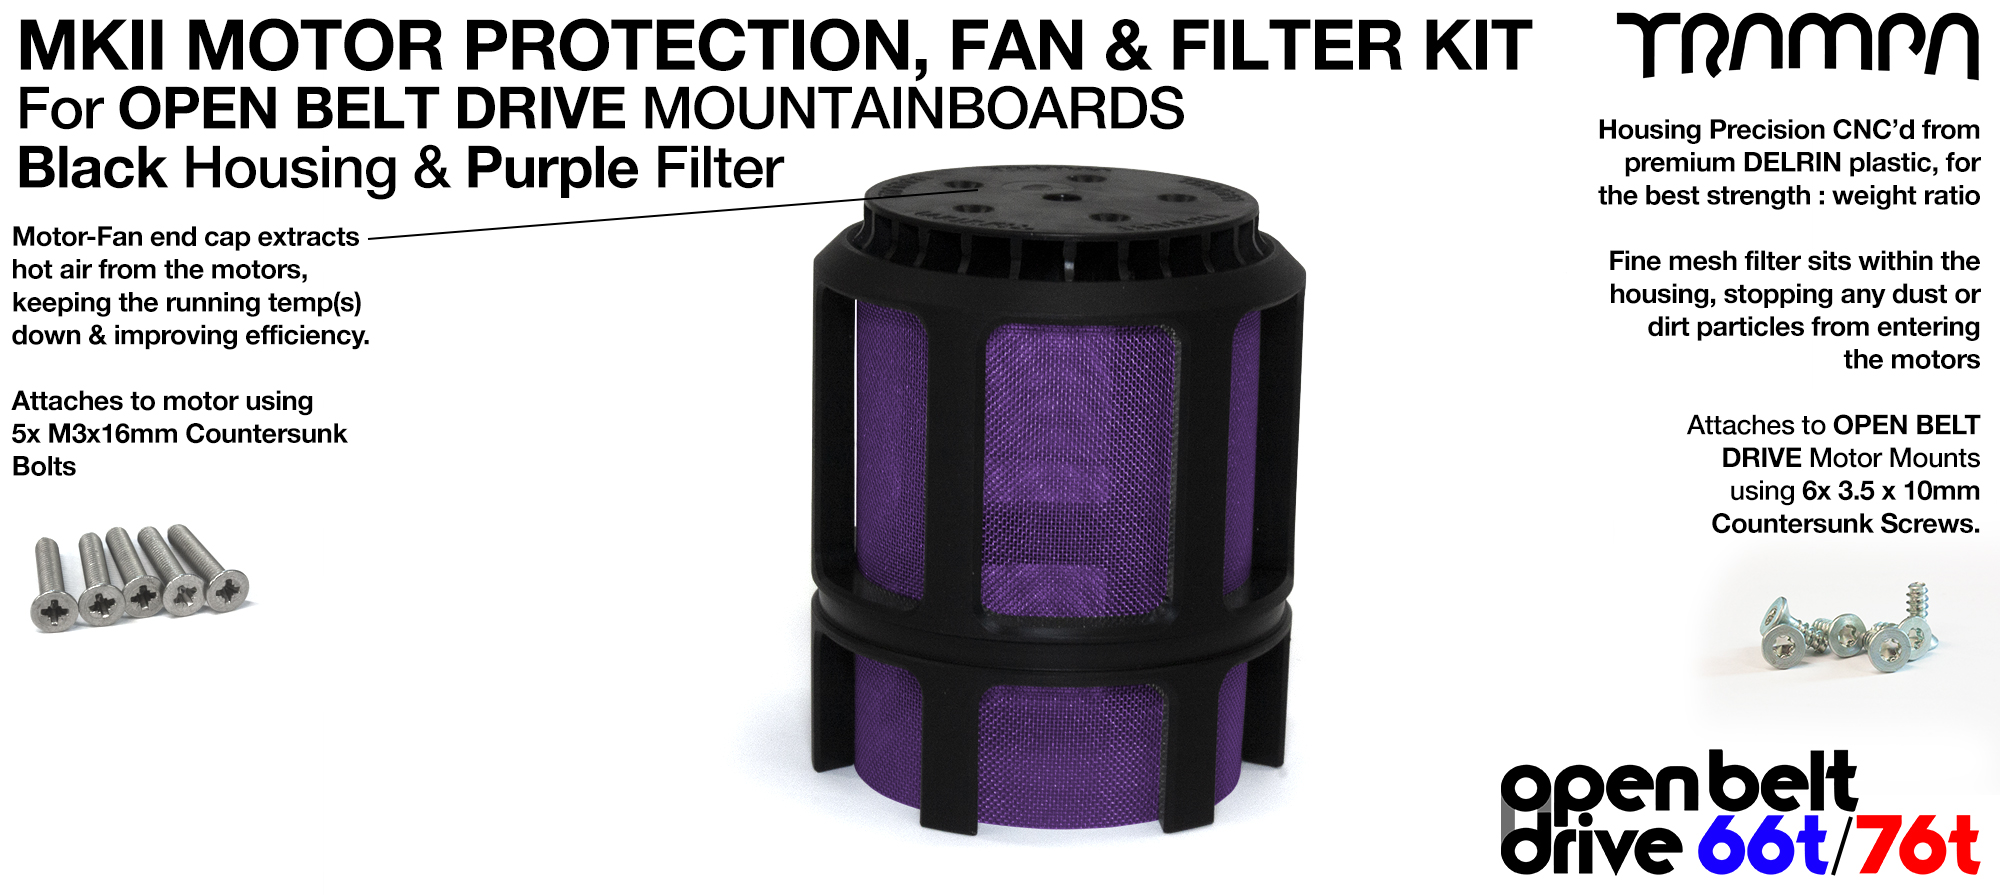 1x OBD MKII Motor protection Sleeve with PURPLE Filter